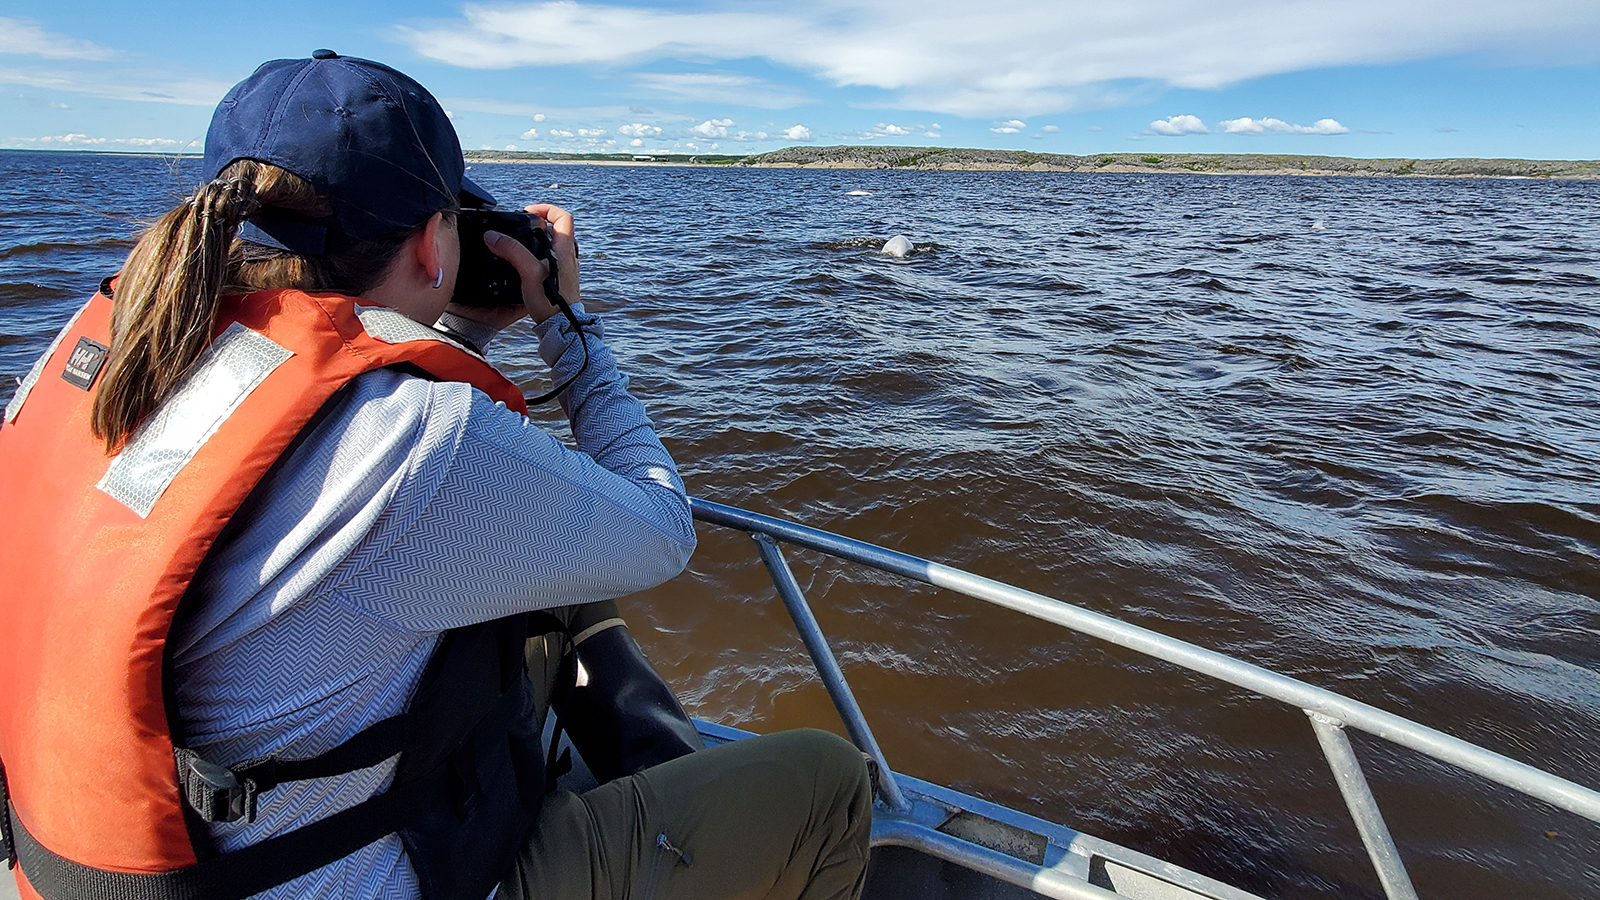 Researcher photographs beluga whales from a boat